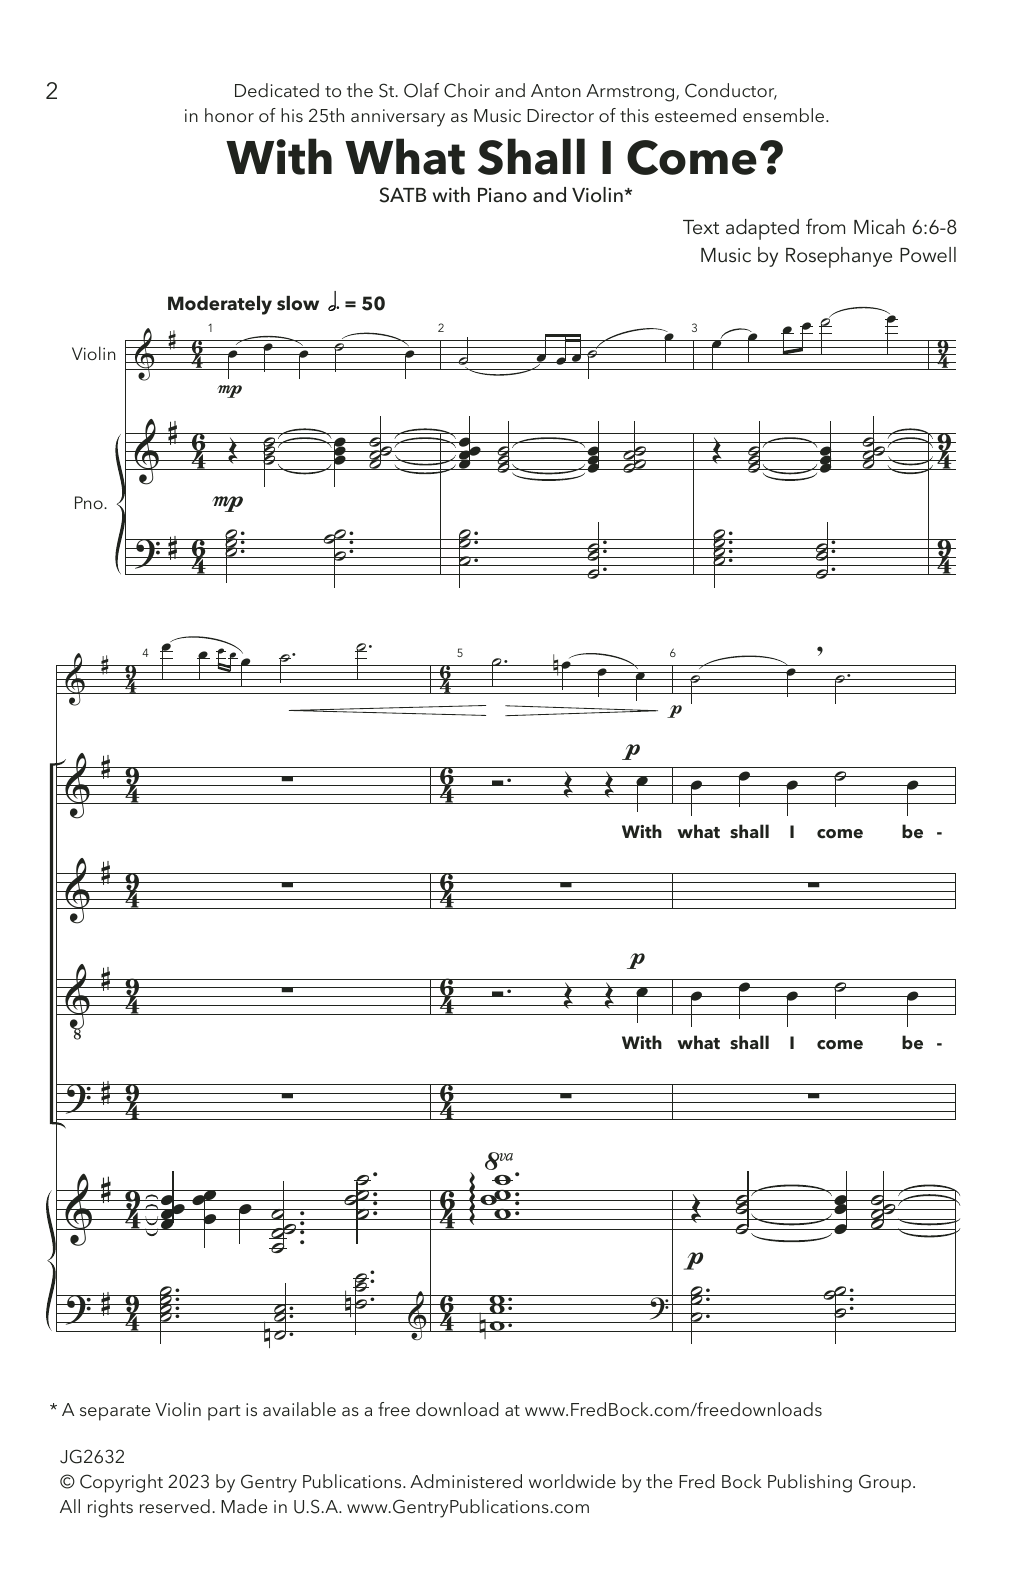 Download Rosephanye Powell With What Shall I Come? Sheet Music